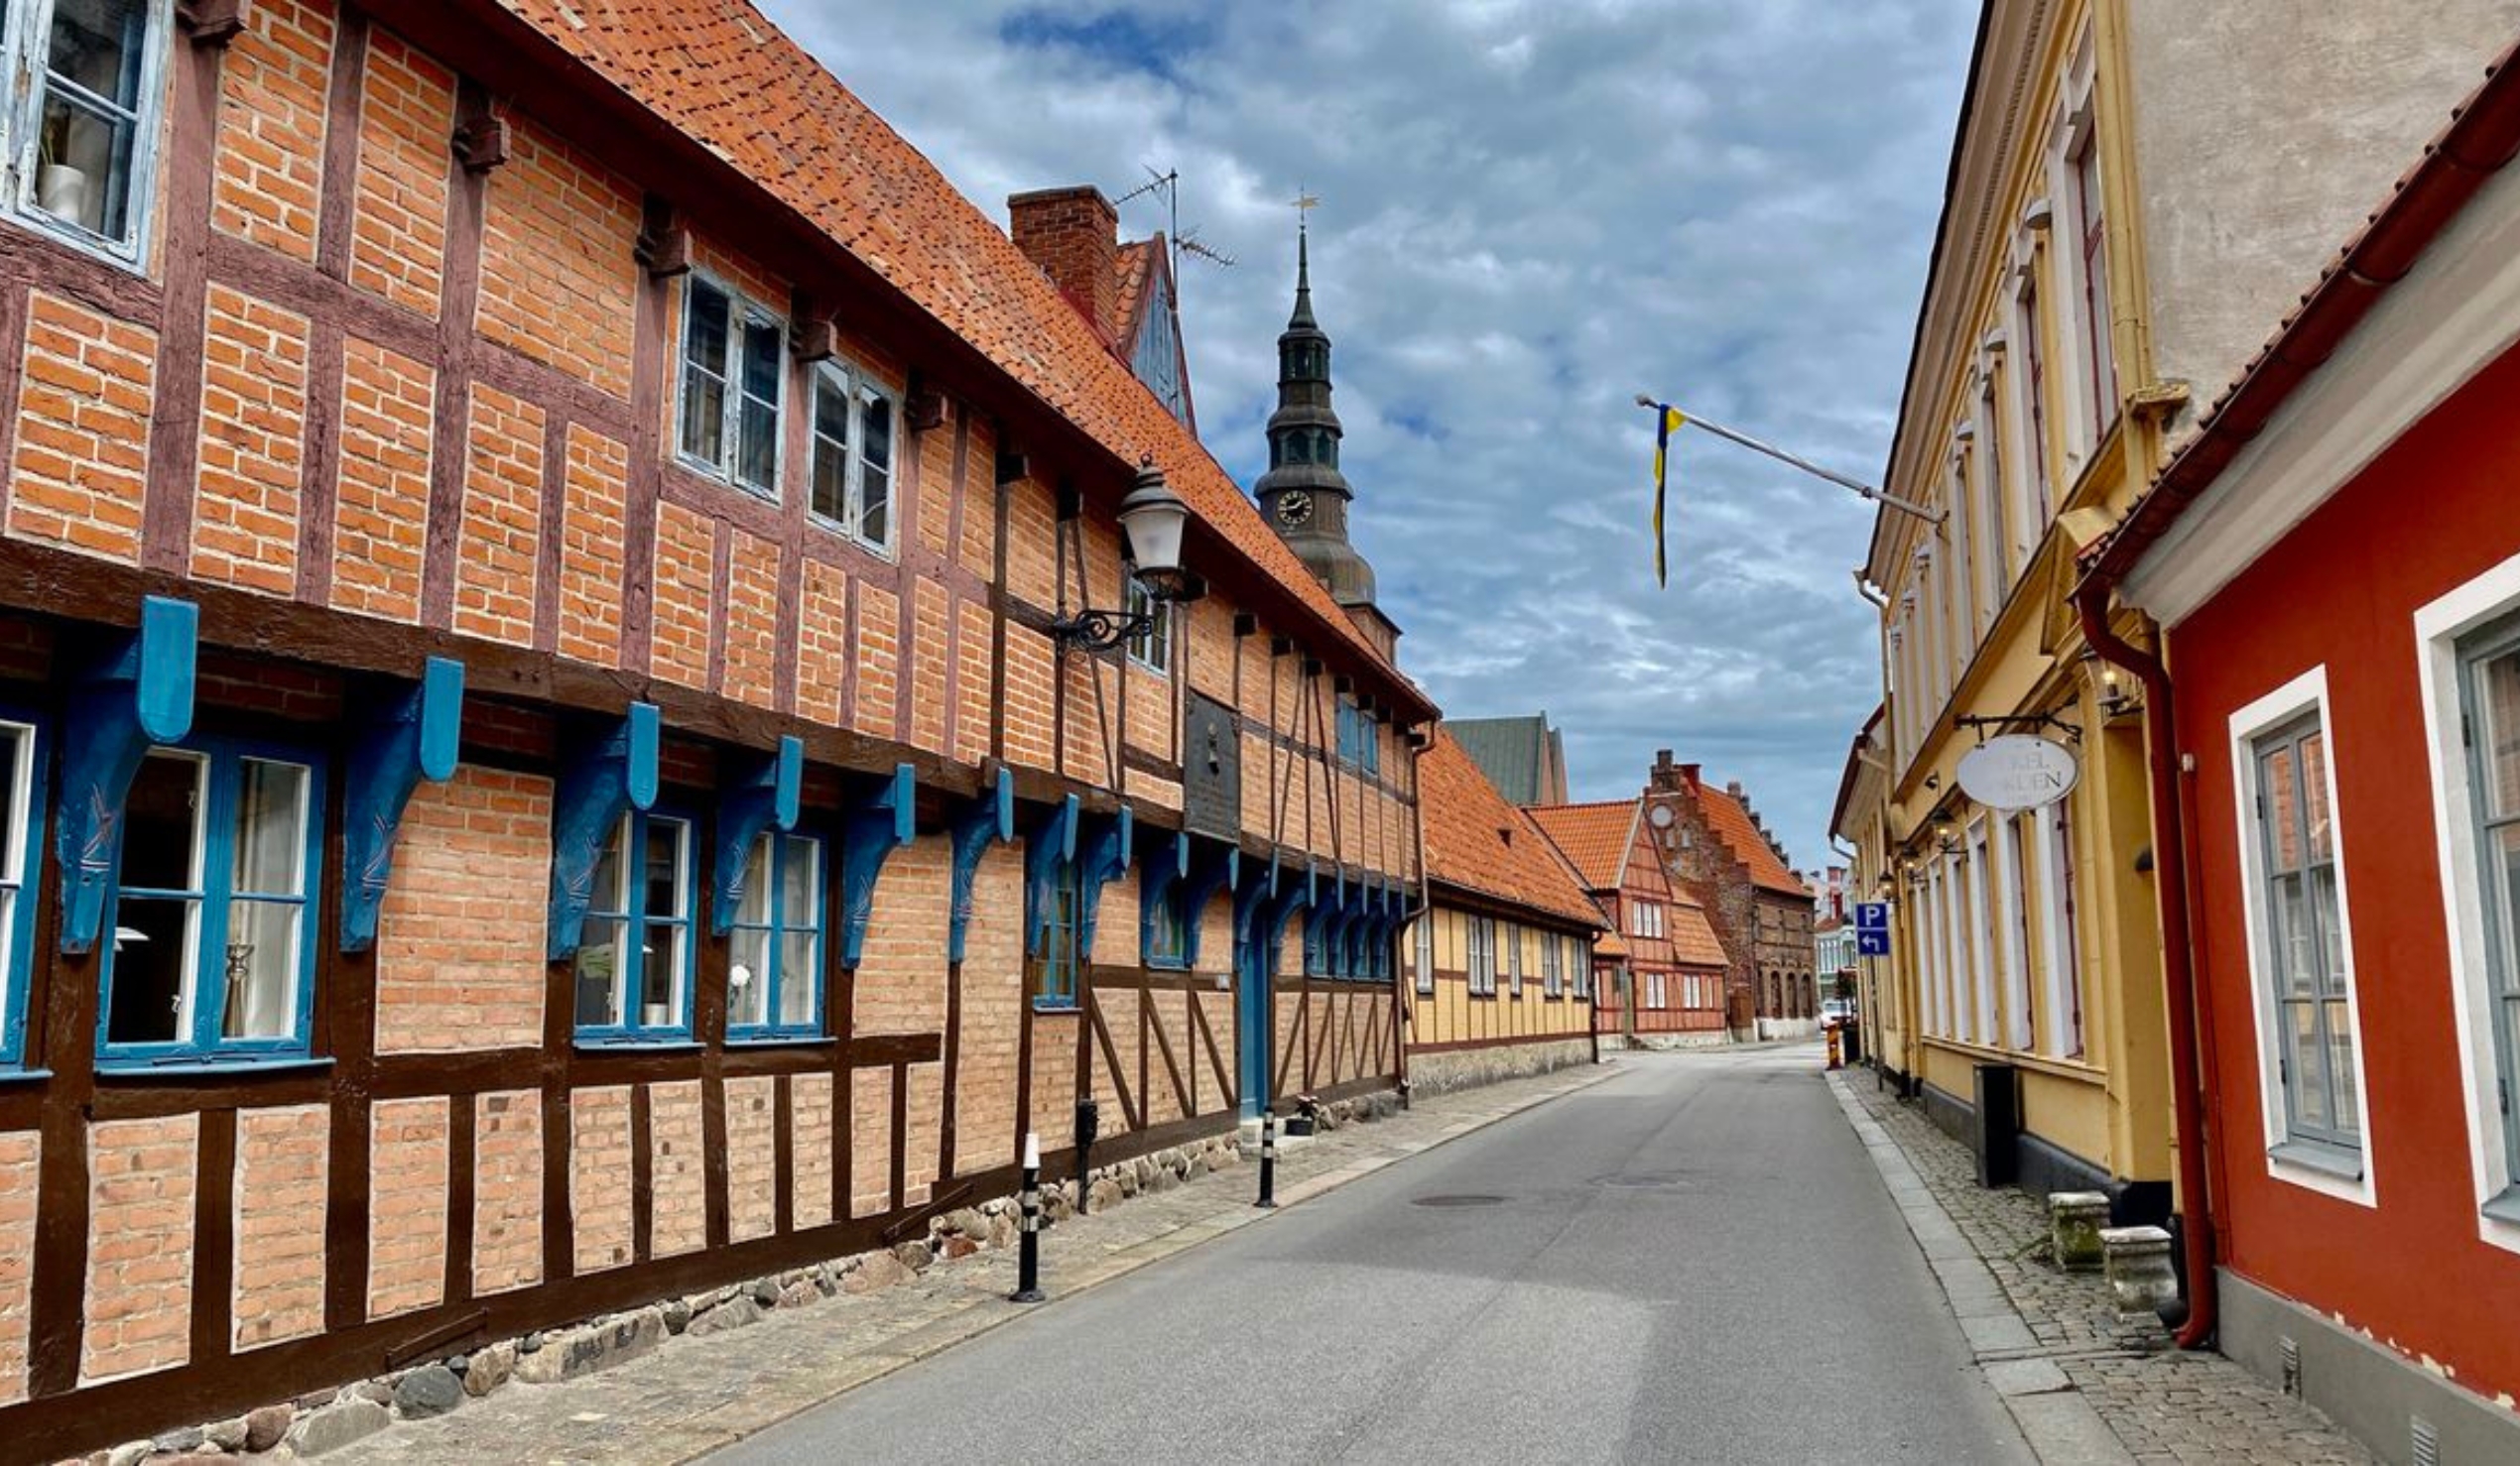 Ystad is a charming little town, full of half-timbered houses.